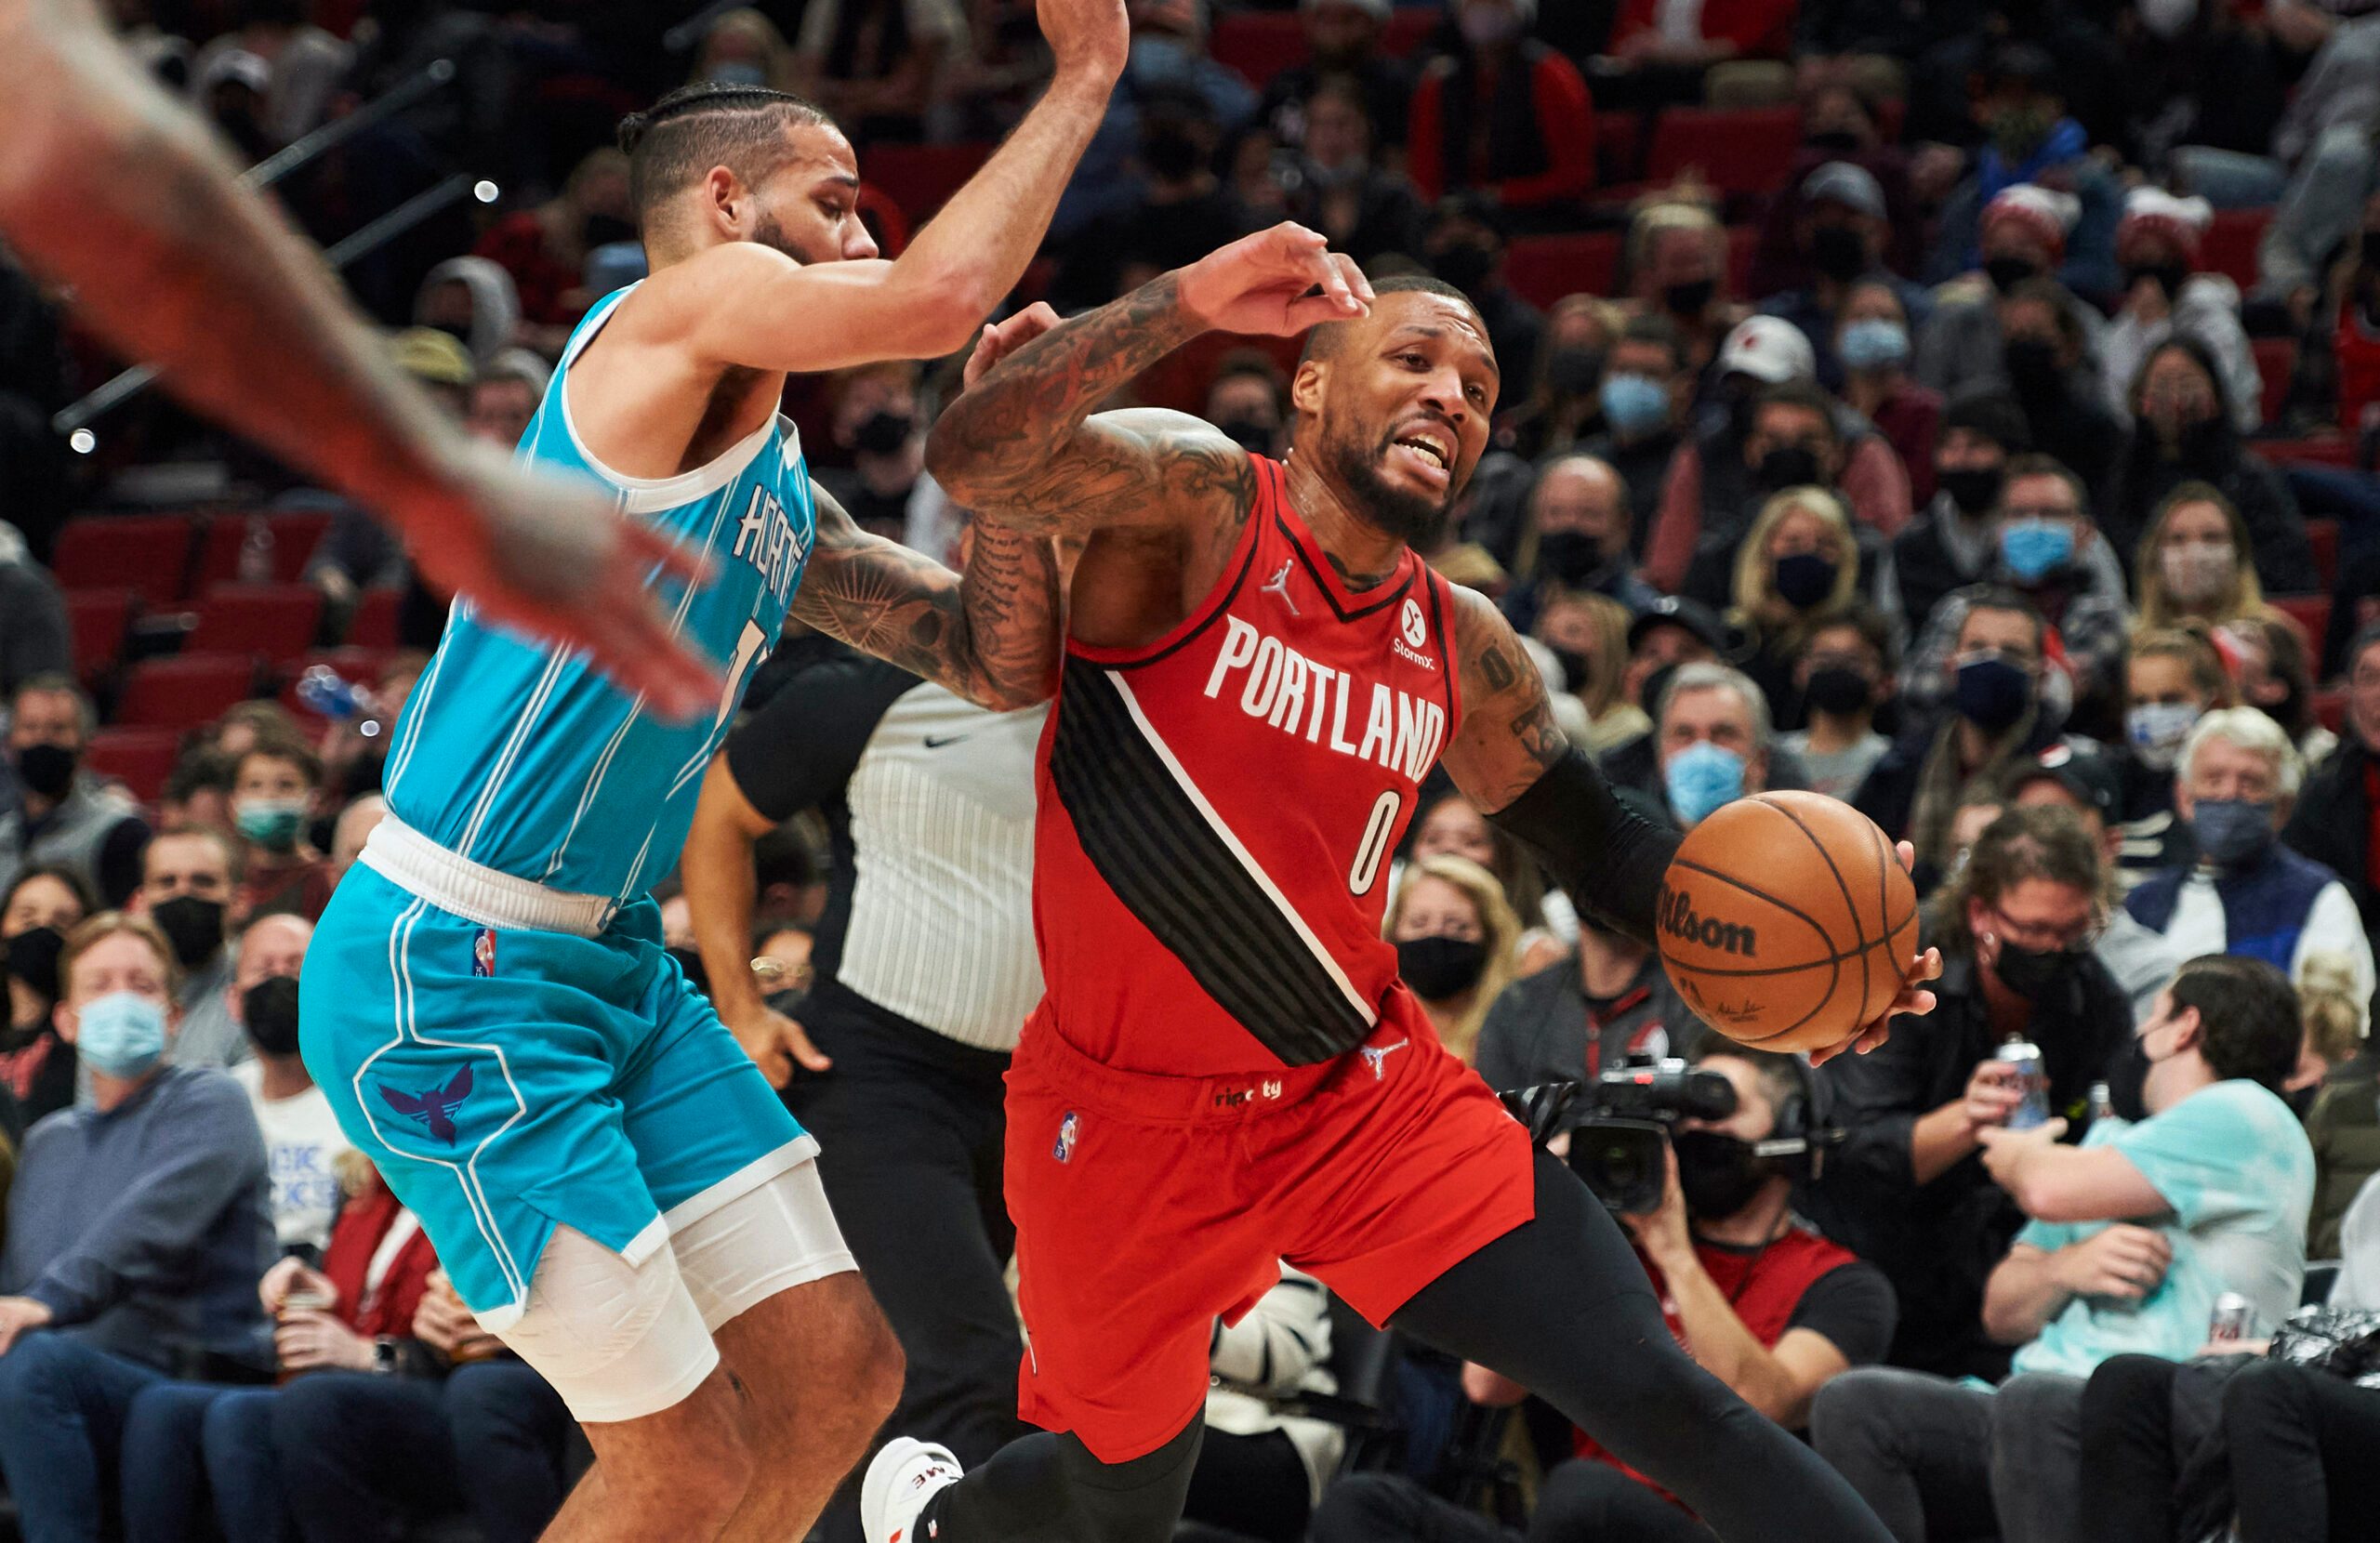 Lillard erupts for 43 points to carry Blazers past Hornets